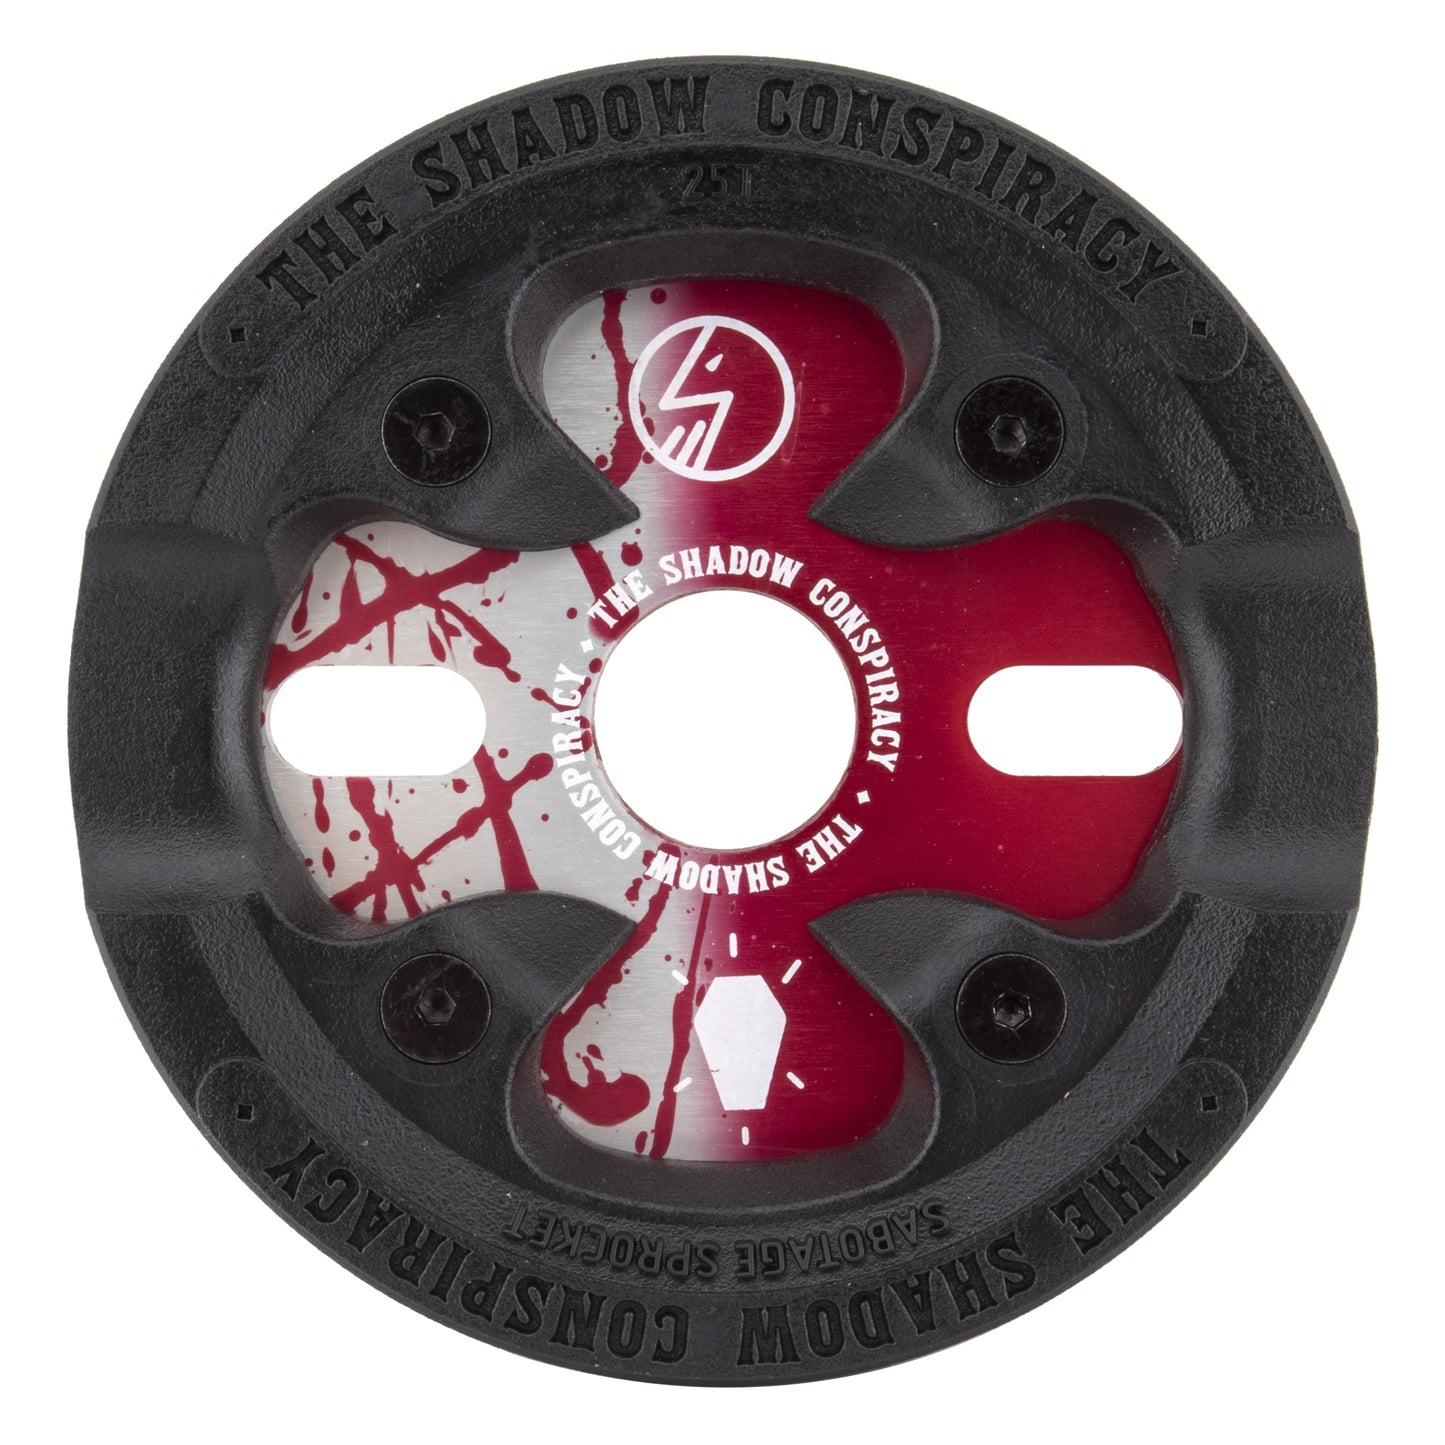 The Shadow Conspiracy Chainring Sprocket Sabotage